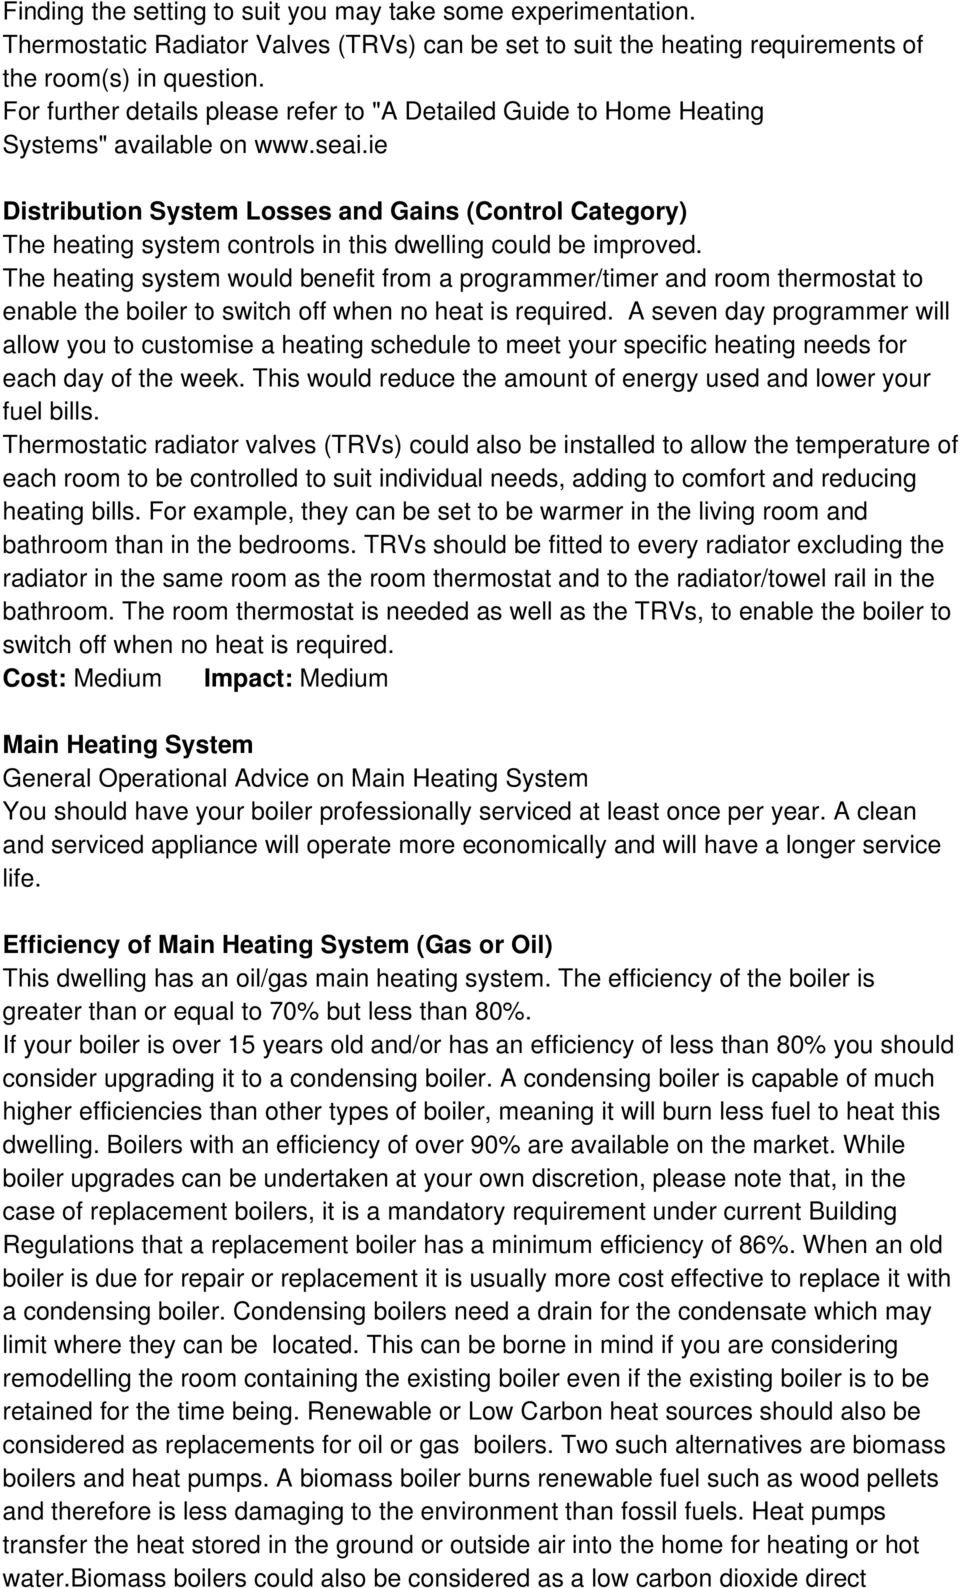 ie Distribution System Losses and Gains (Control Category) The heating system controls in this dwelling could be improved.